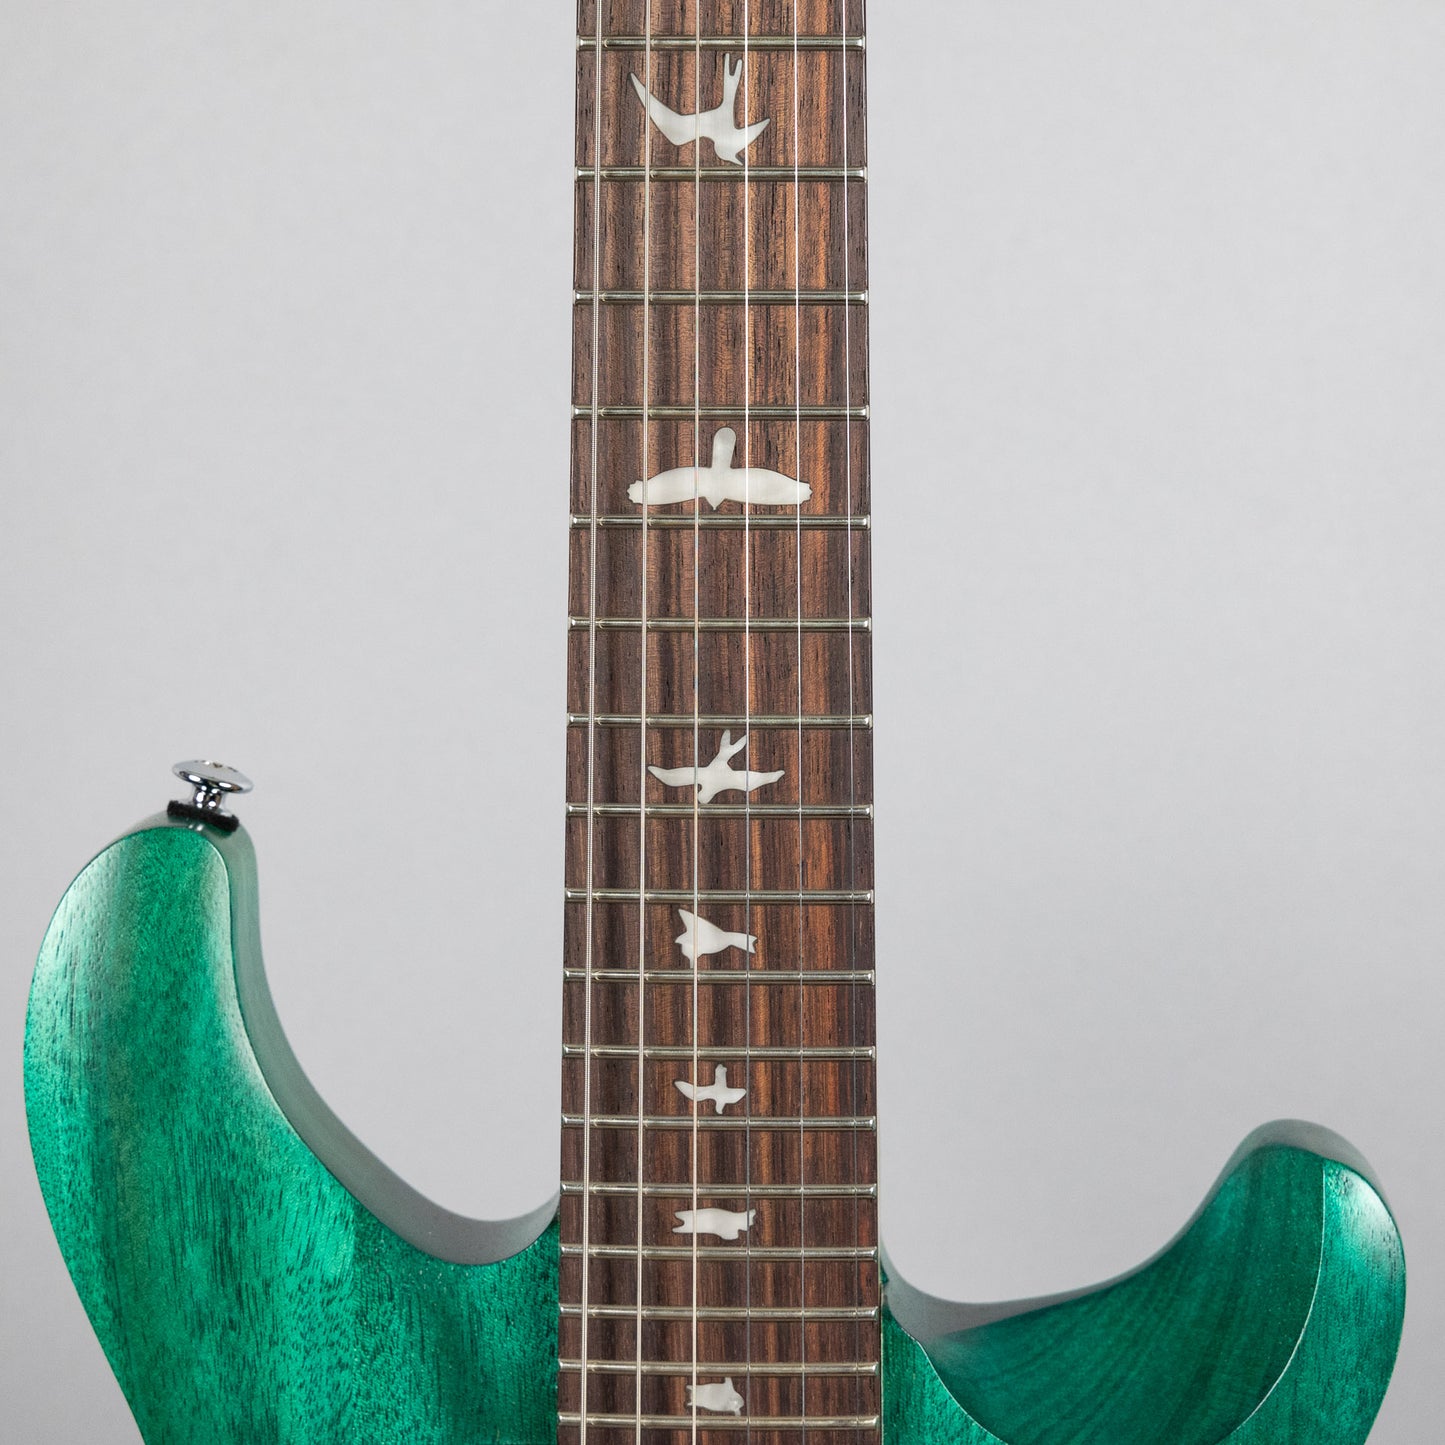 Paul Reed Smith SE CE24 Standard Satin in Turquoise (CTIF095322)